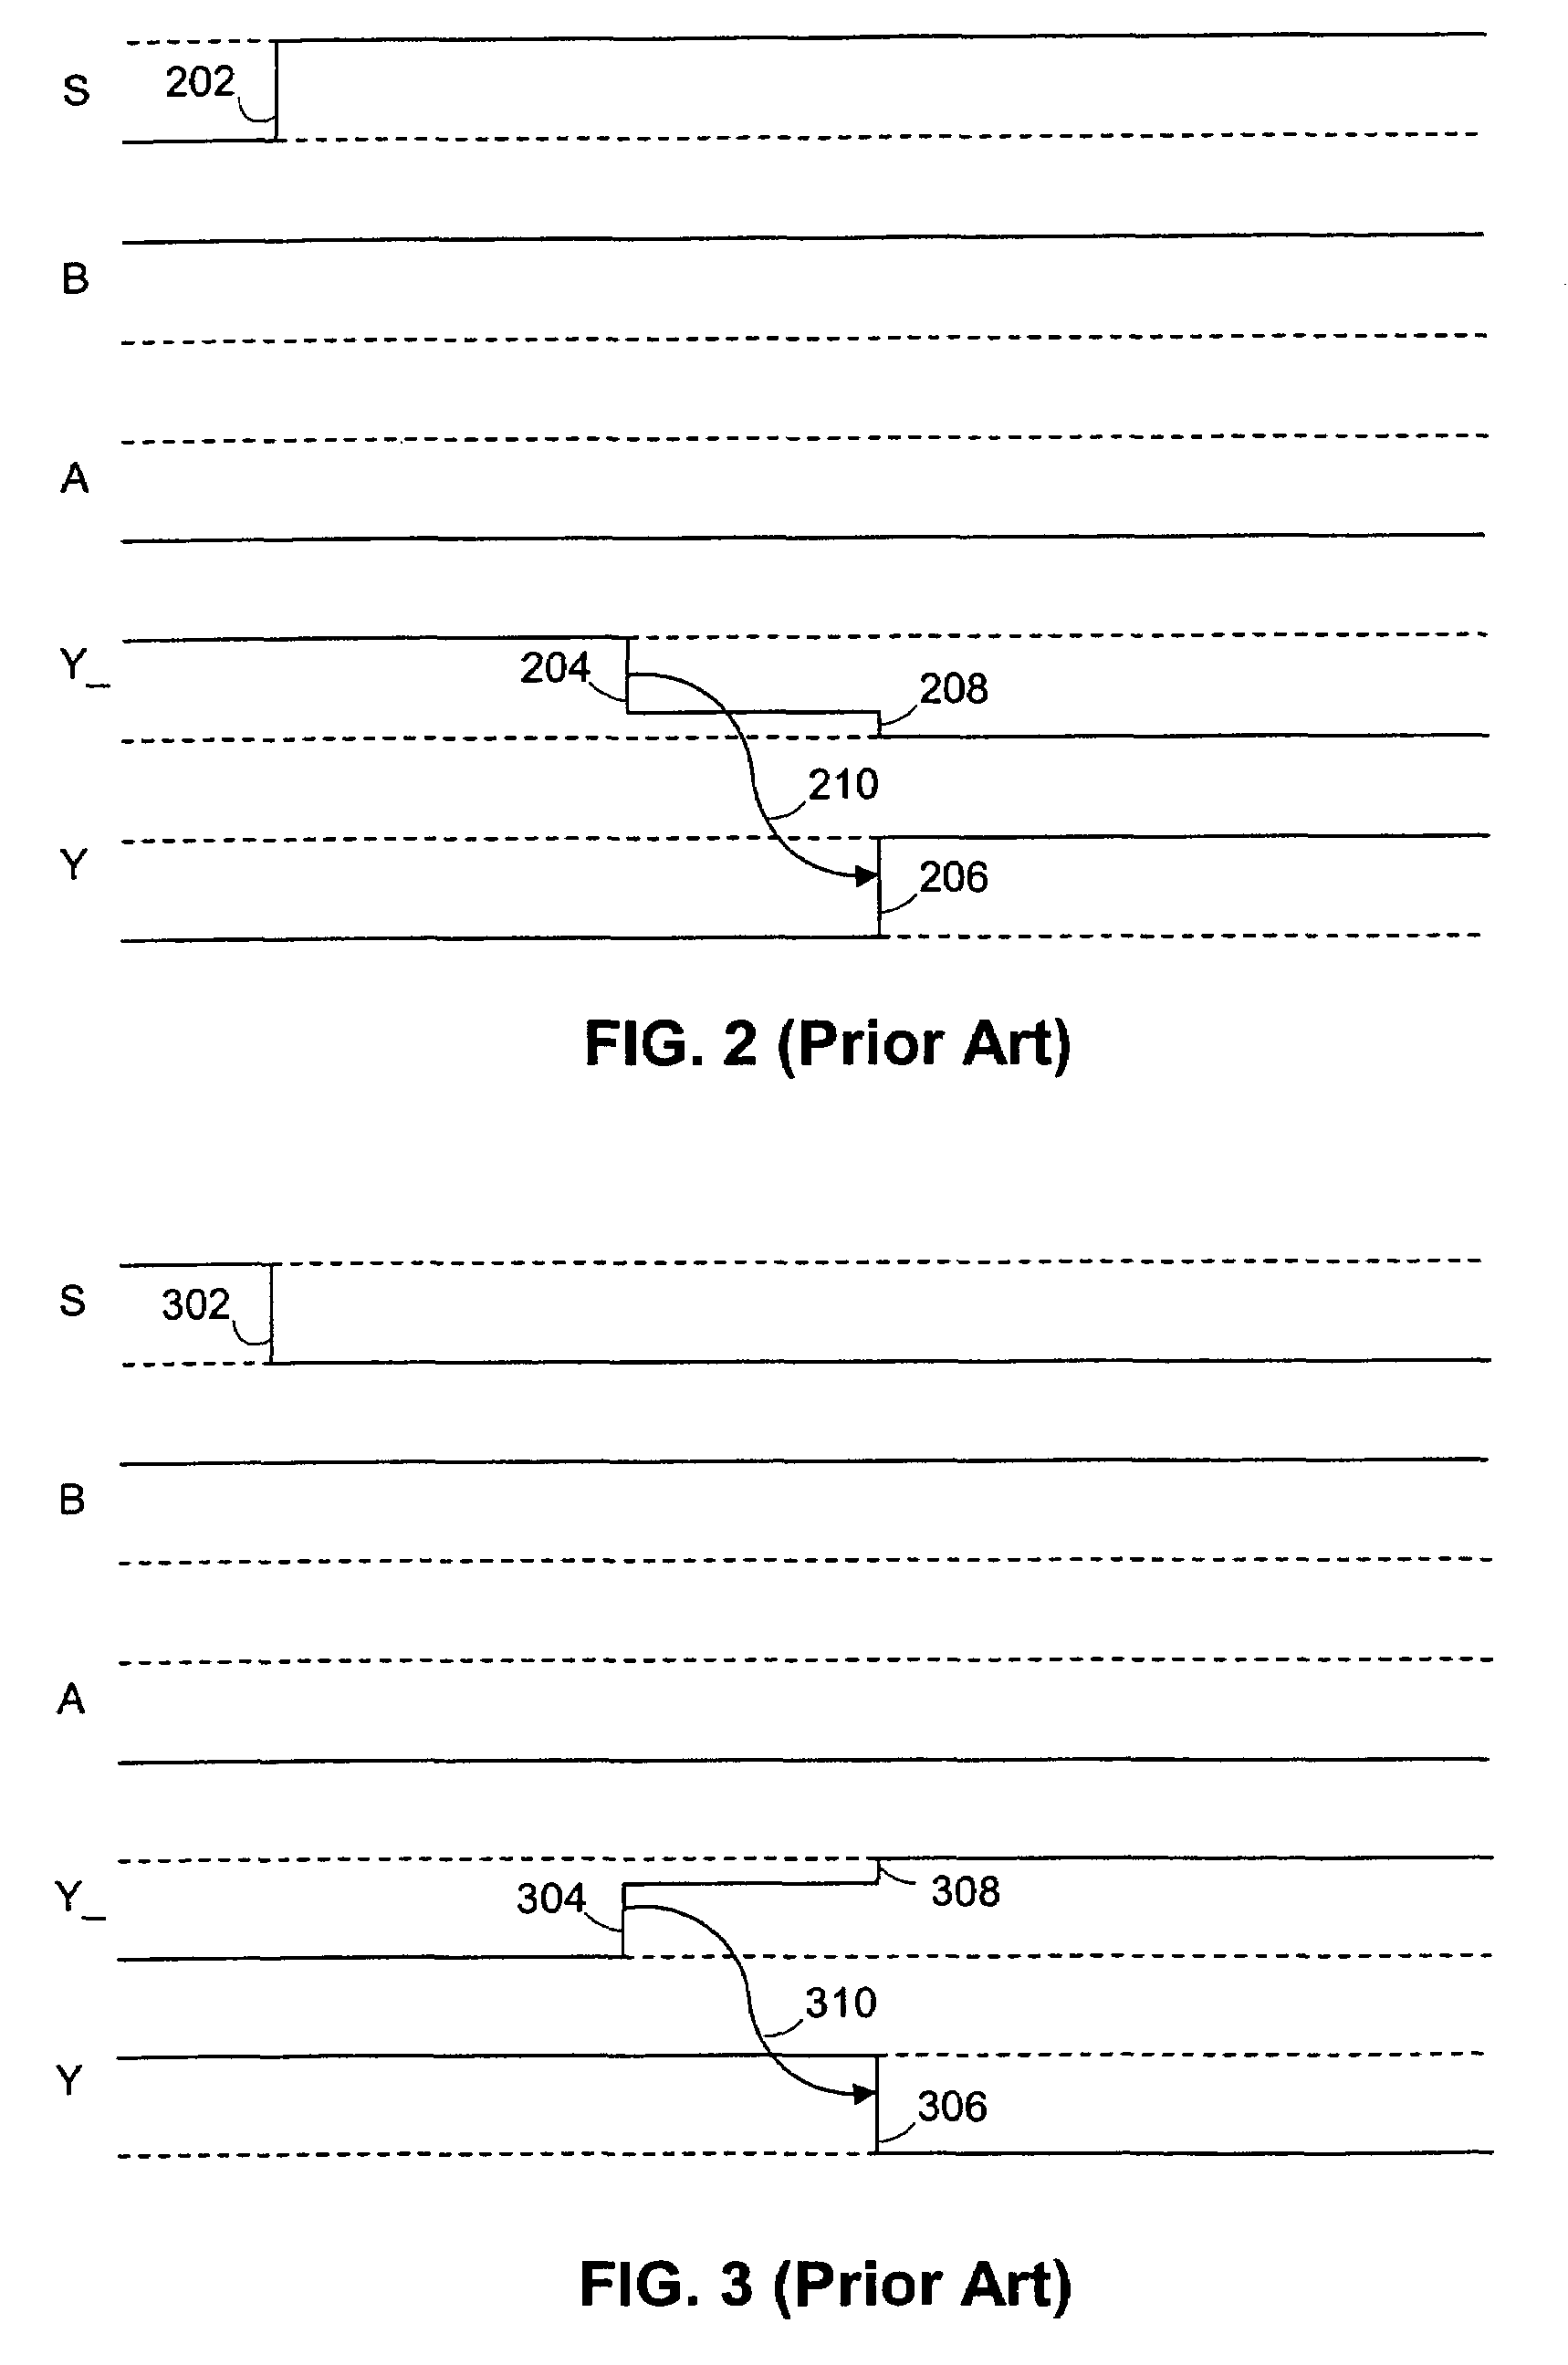 Time-balanced multiplexer switching methods and apparatus